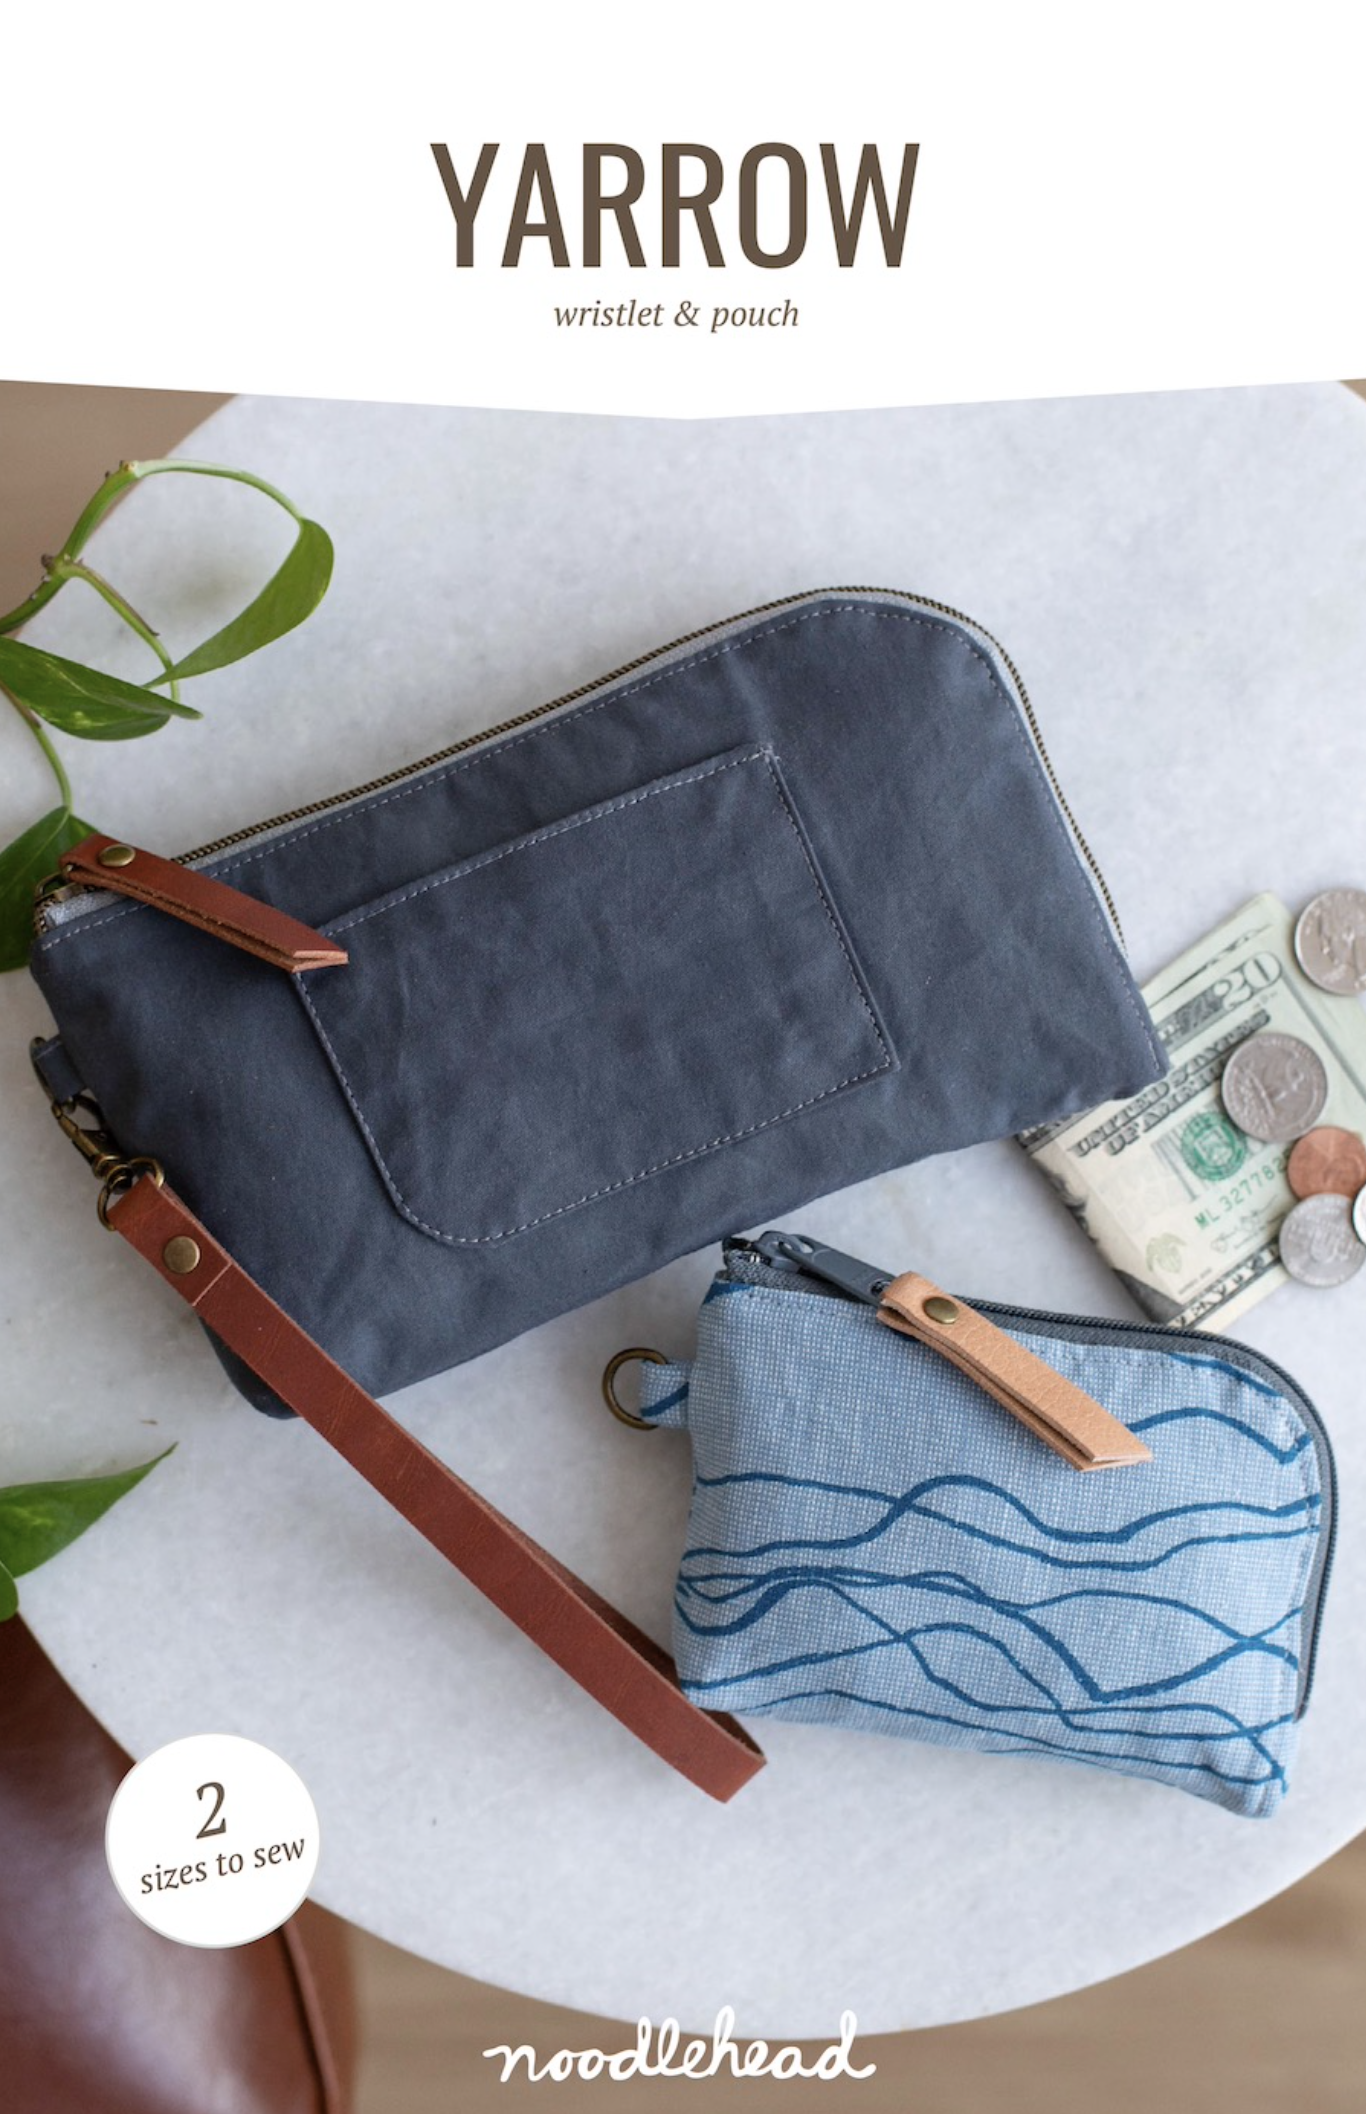 Noodlehead Yarrow Wristlet and Pouch